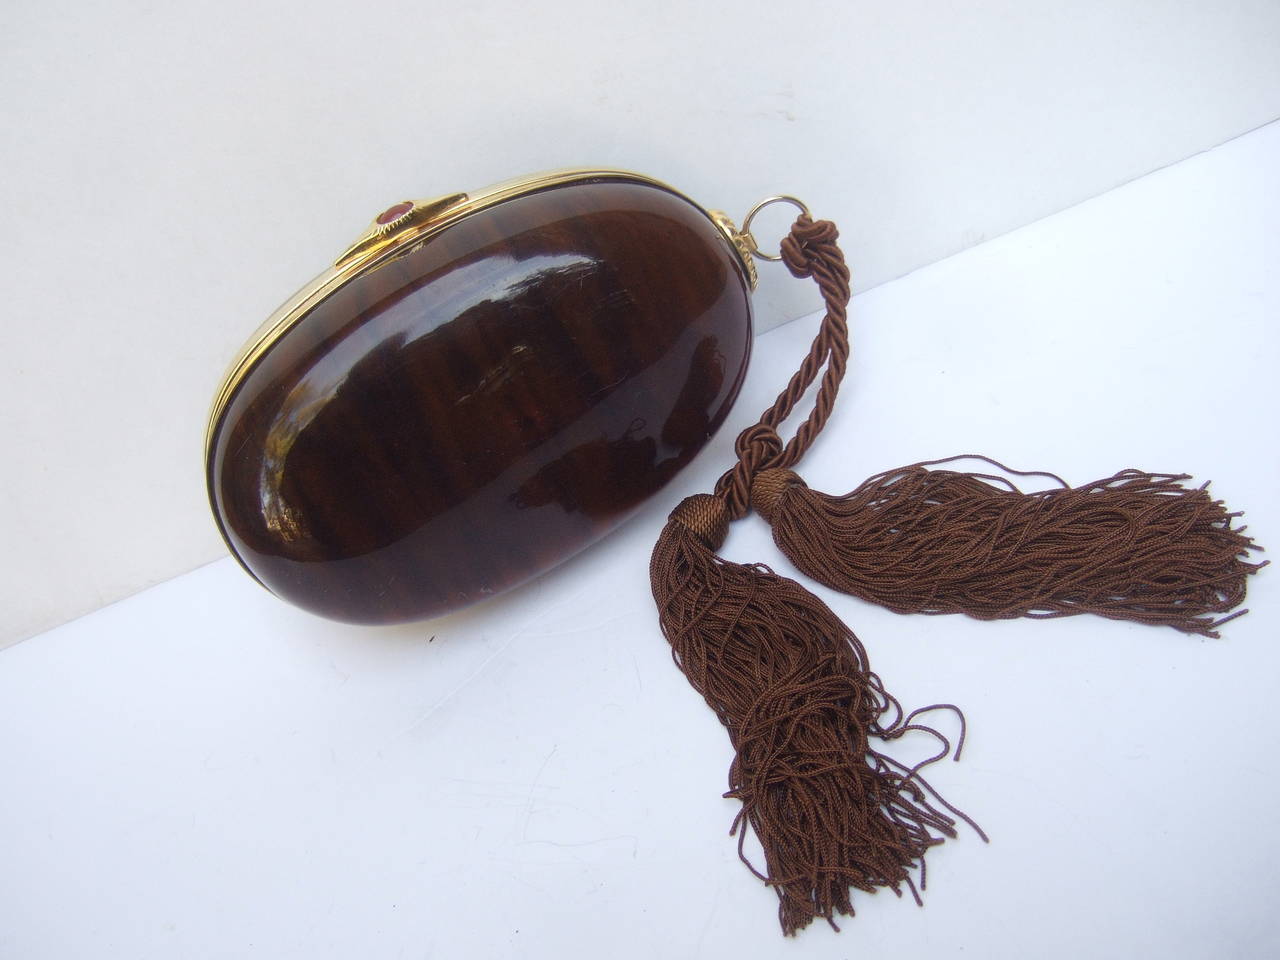 Saks Fifth Avenue Tortoise shell lucite evening bag c 1970s
The elegant oval shaped clutch bag is covered with brown lucite panels
Designed with a sleek gilt metal clasp frame that circles the evening bag

The clasp is adorned with a carnelian